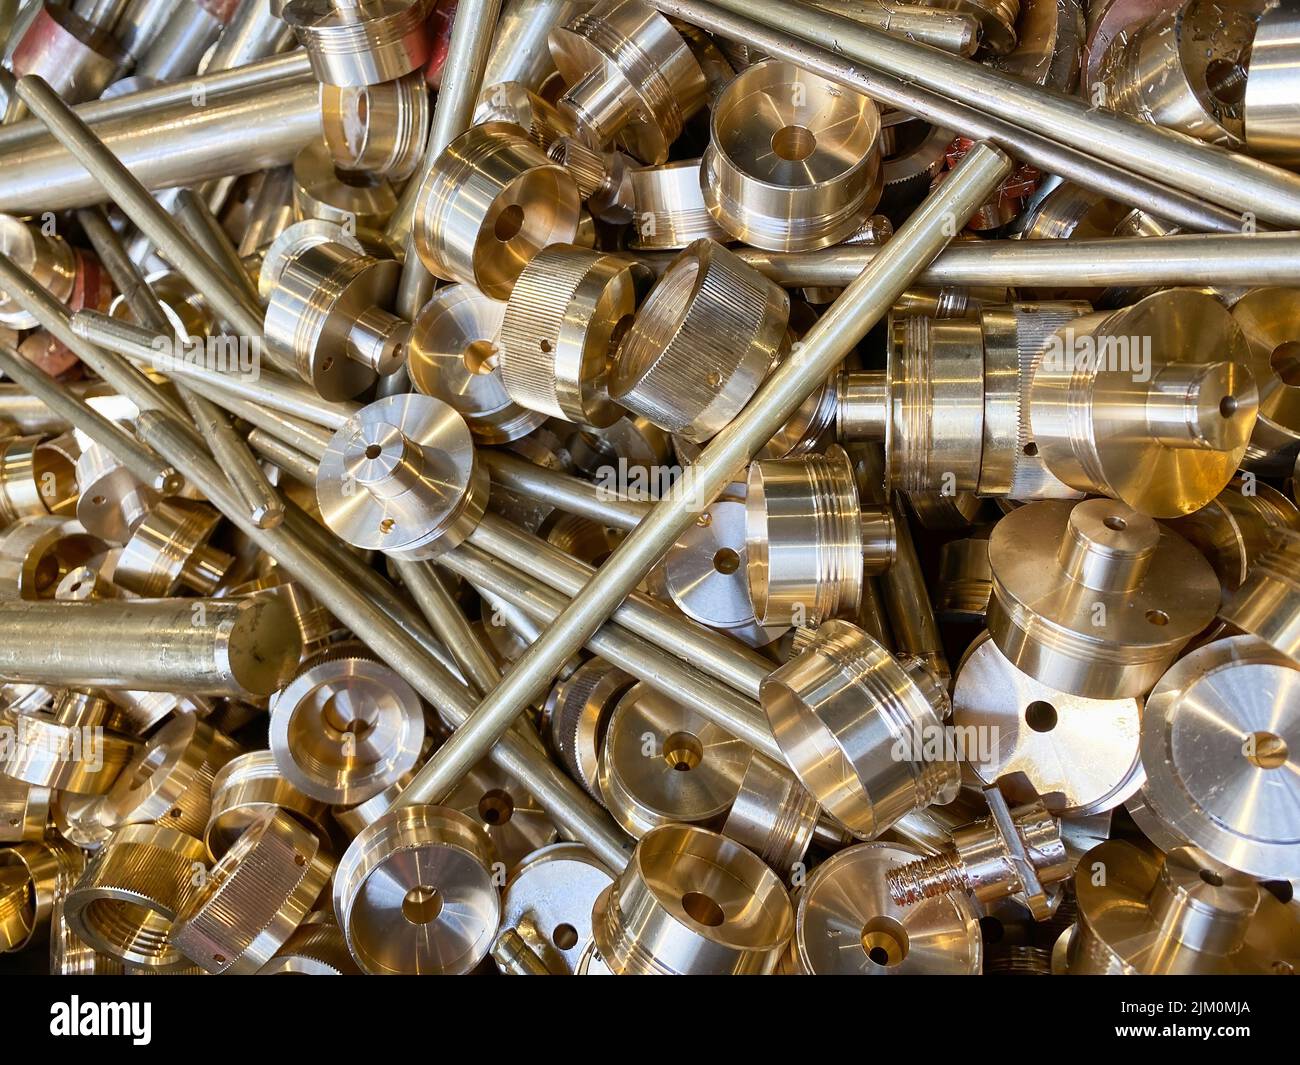 Metal Products in the Factory Scrap Brass Rods Rejects. Stock Image - Image  of machine, waste: 242765759